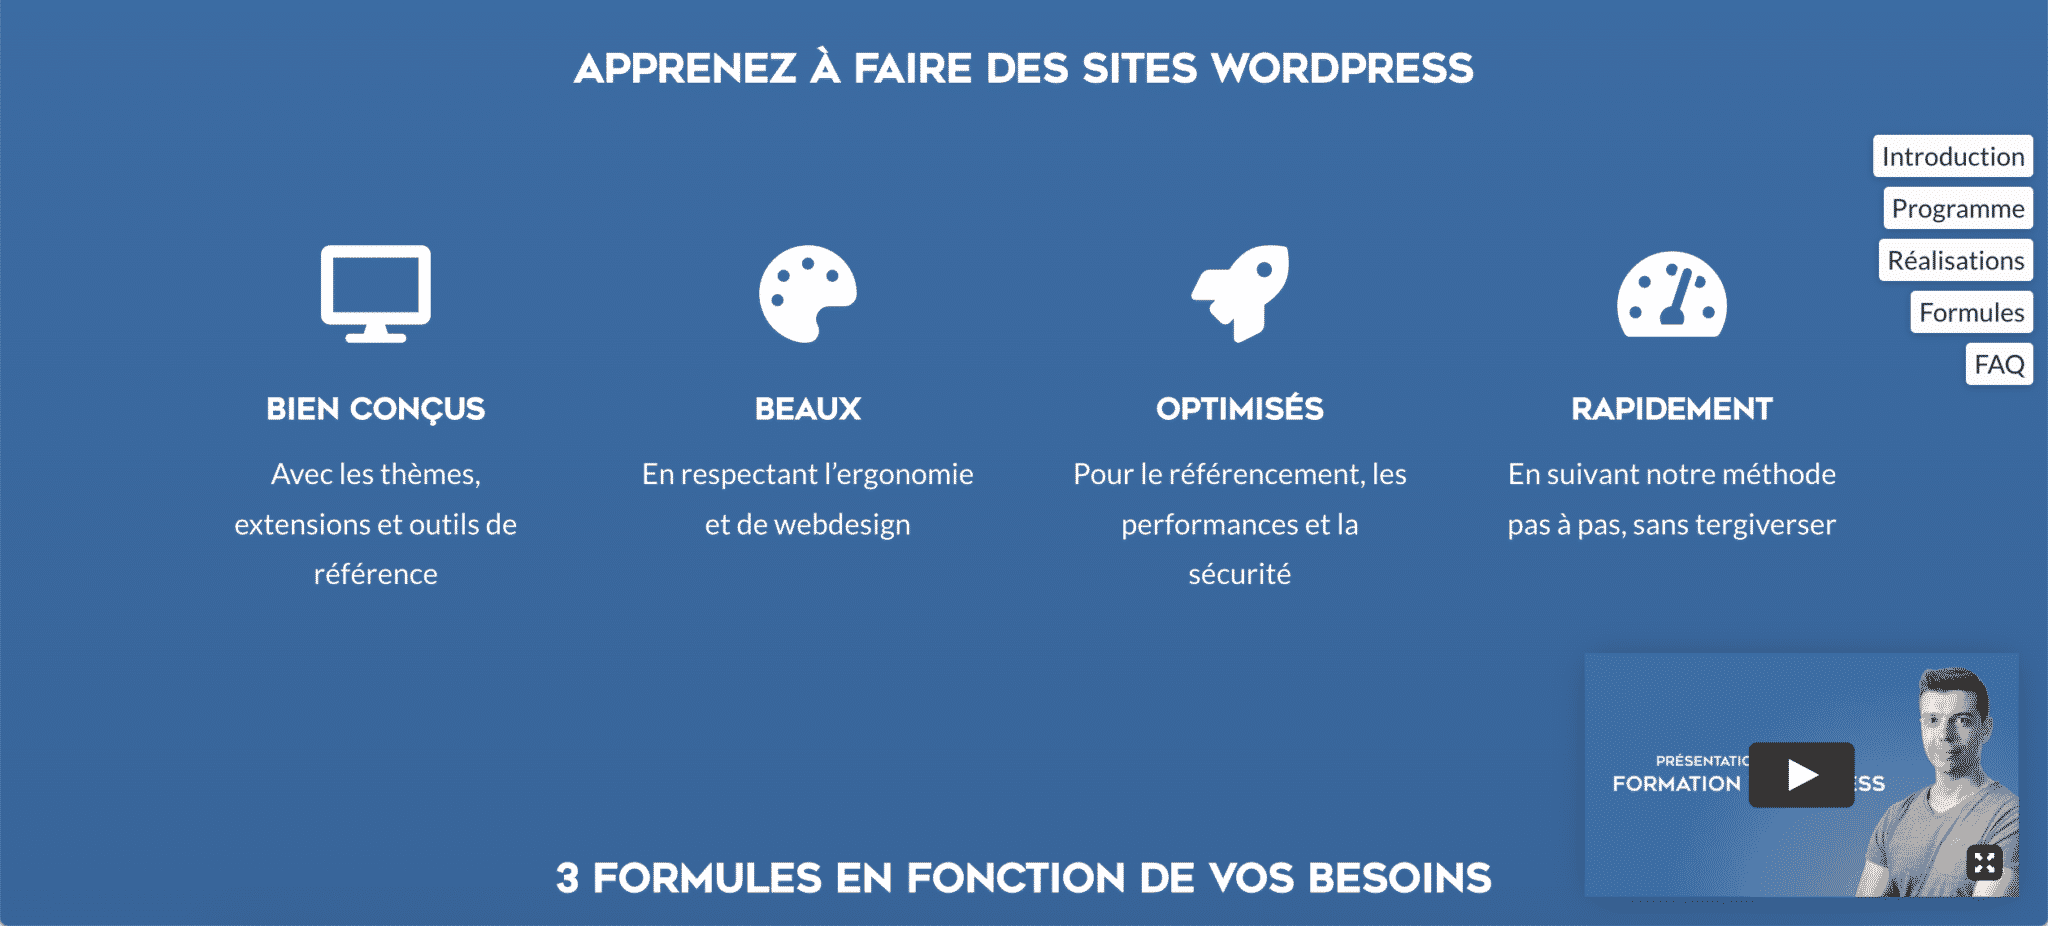 Top-5-meilleures-formations-wordpress-wpchef